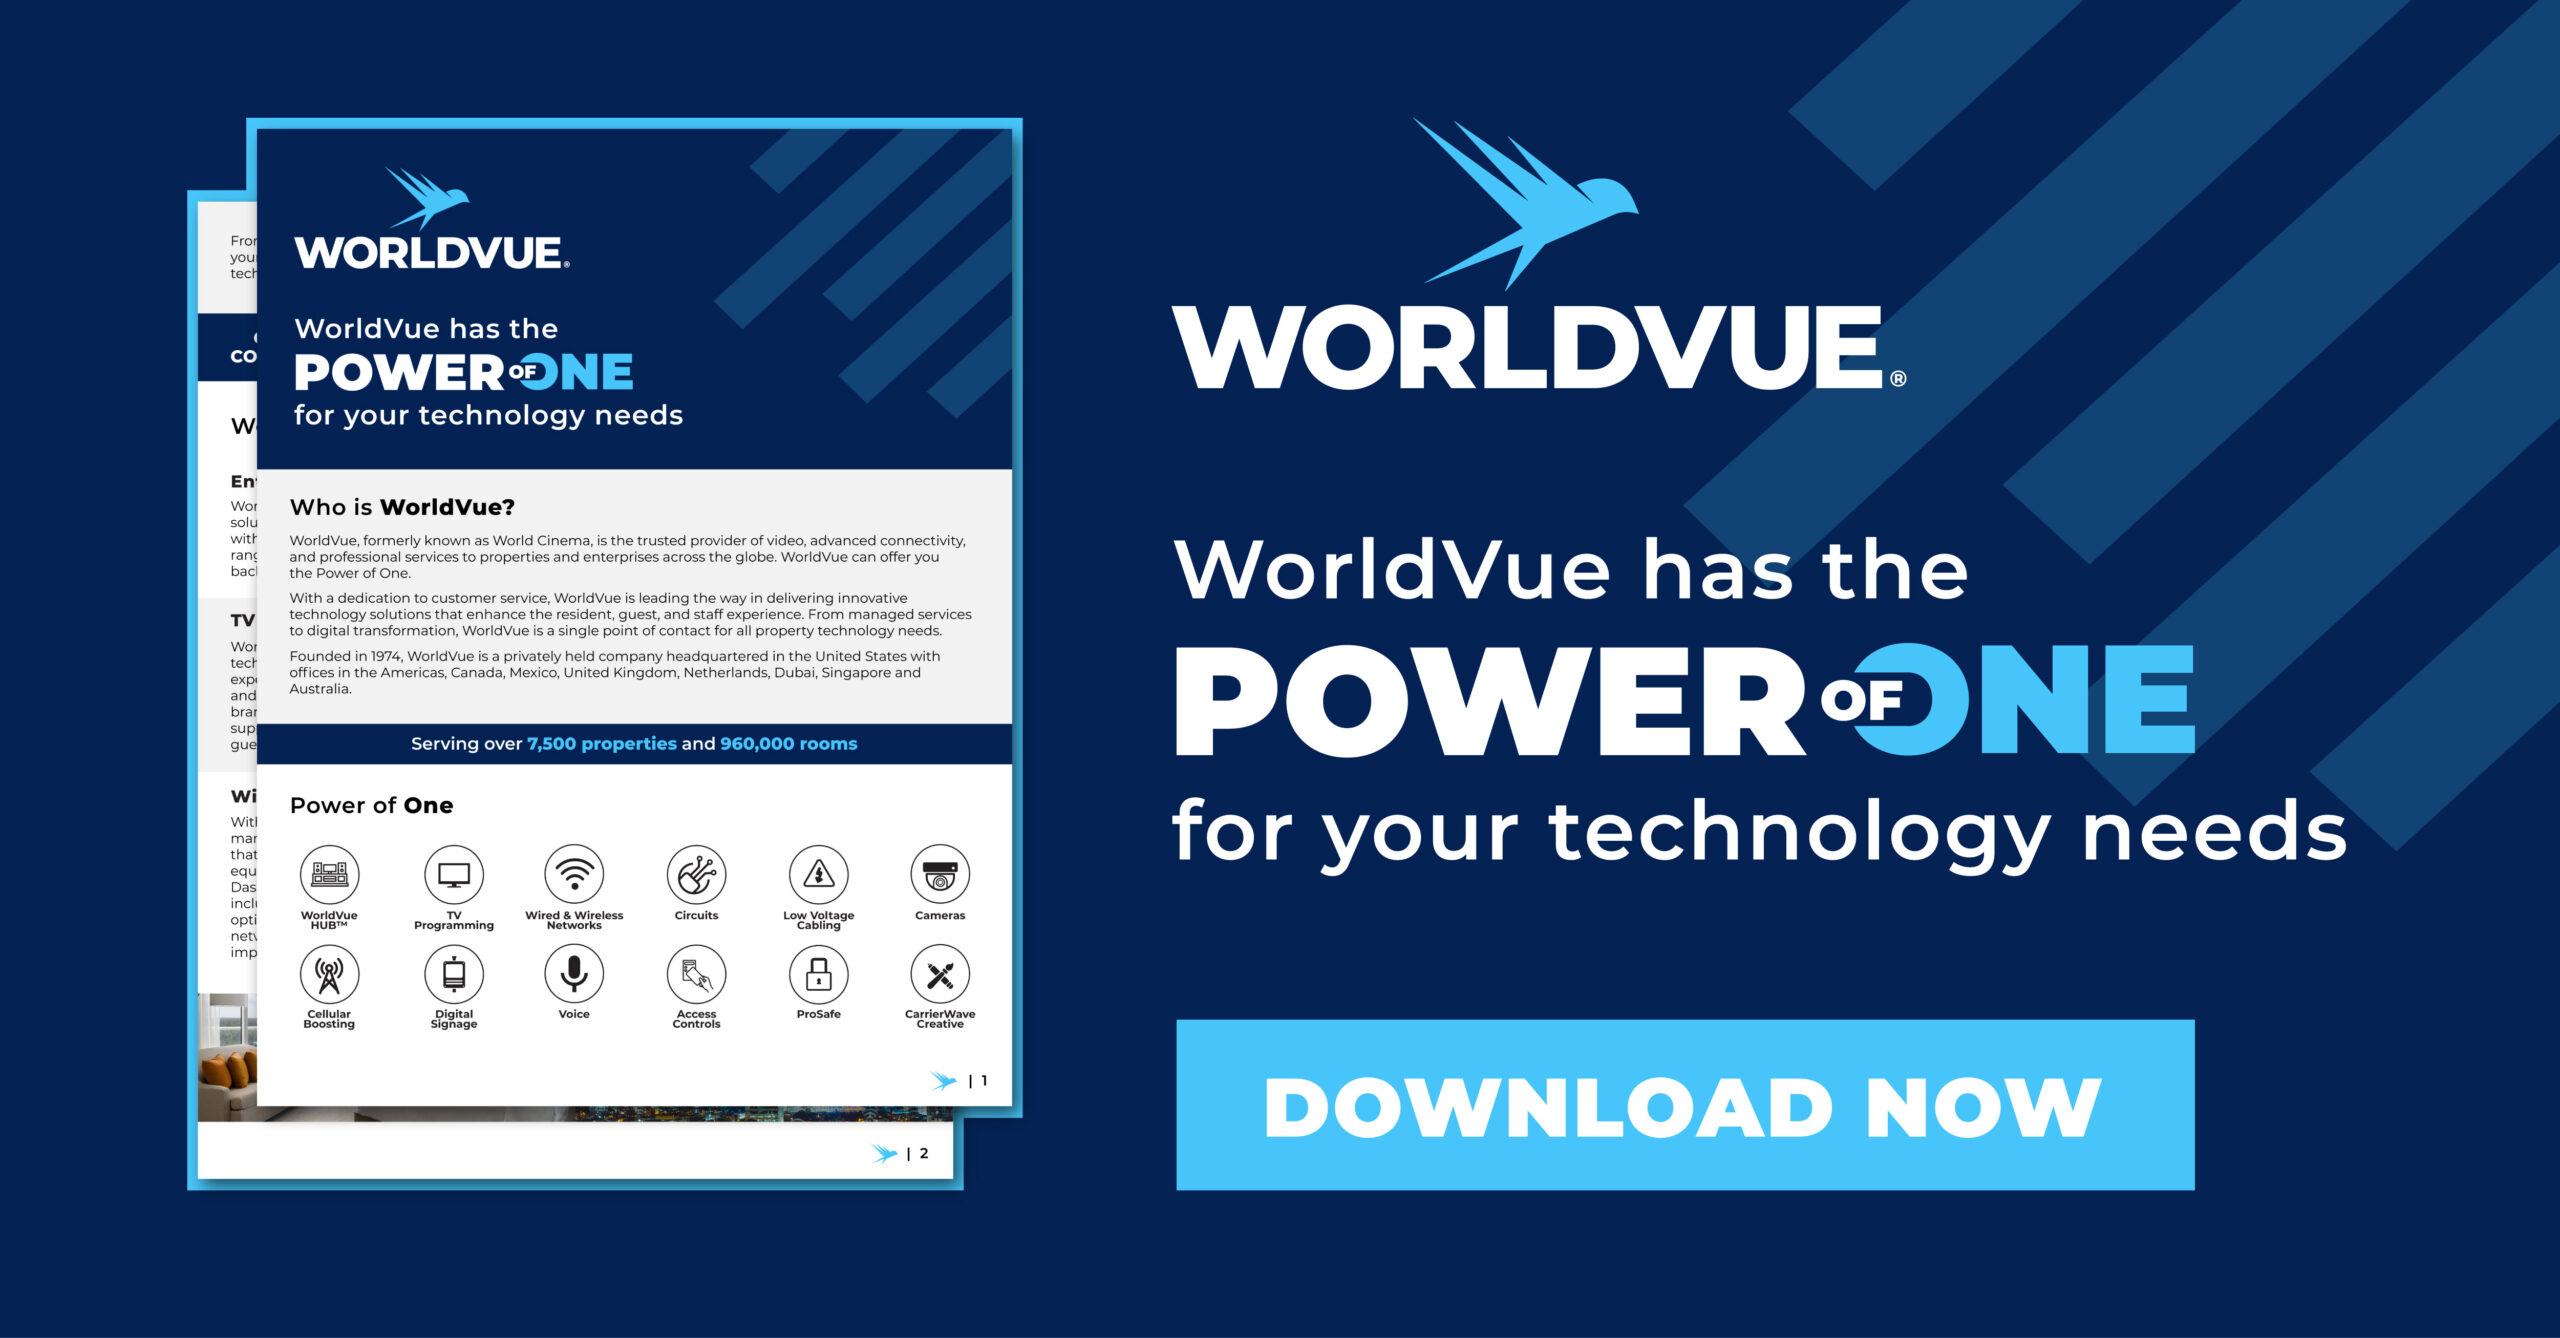 graphic offering download of white paper, with WorldVue logo and text saying "WorldVue has the Power of One for your technology needs"